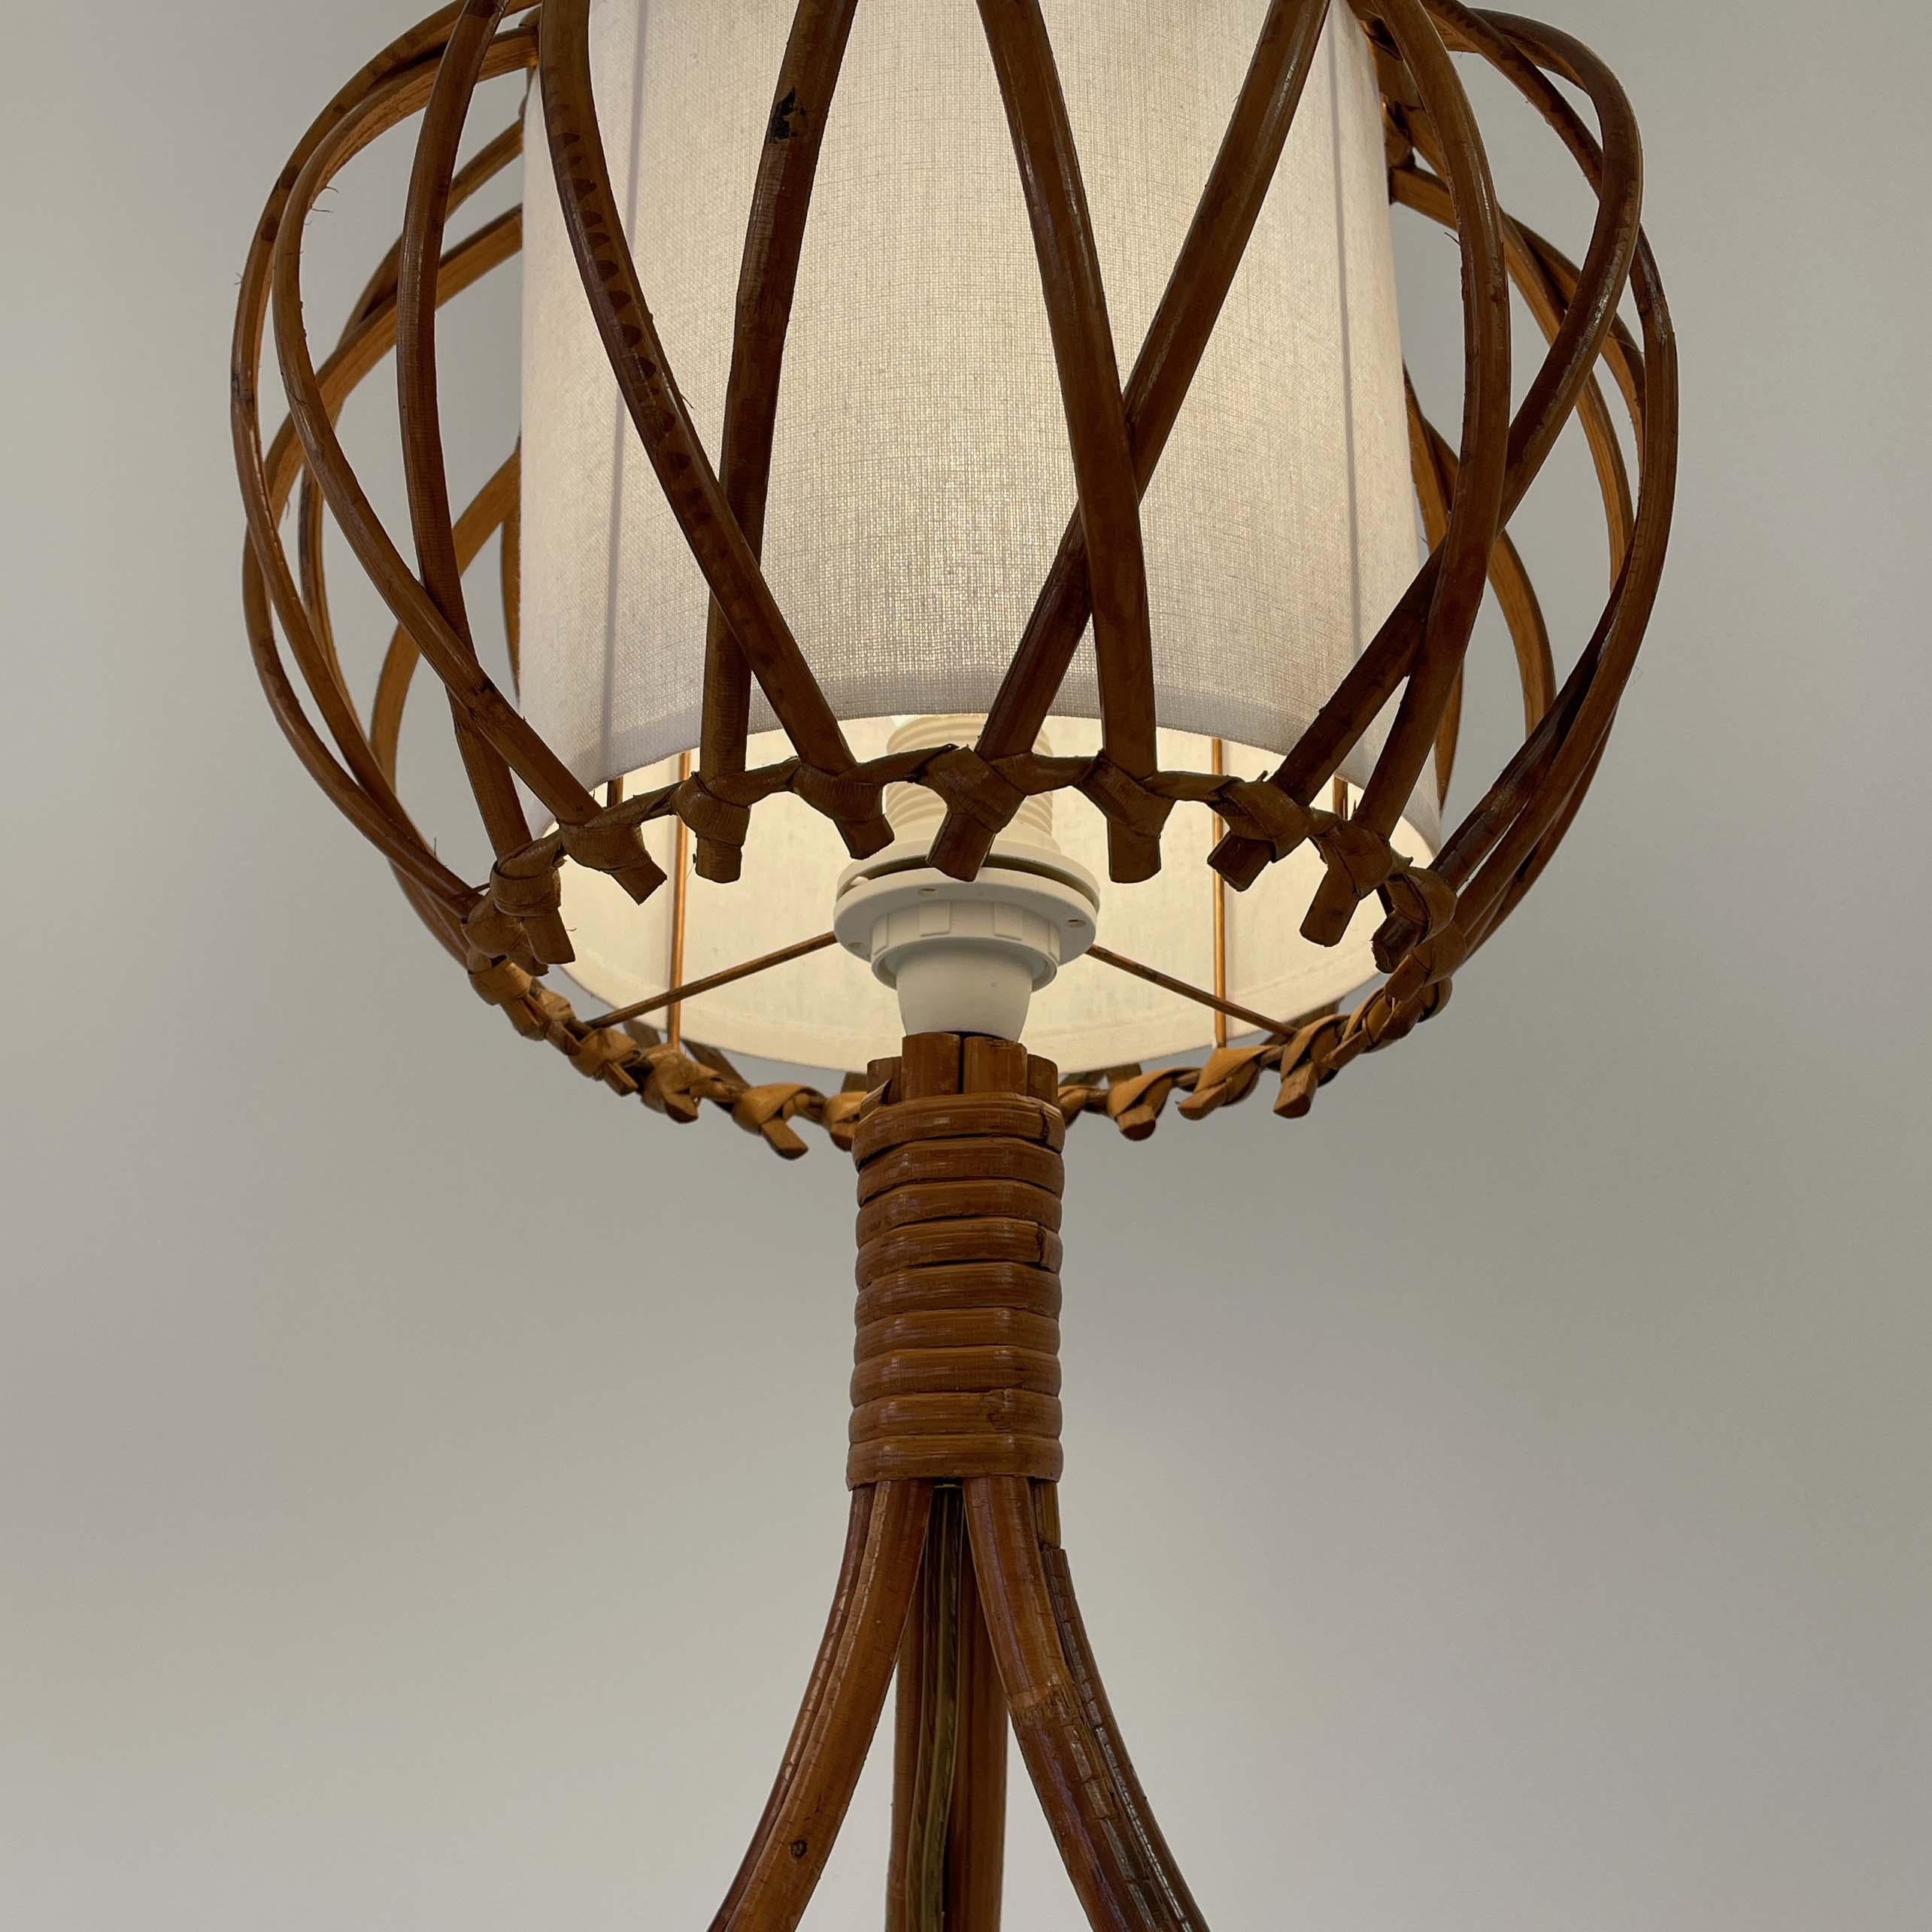 Rattan Bamboo & Fabric Table Lamp, Louis SOGNOT France 1950s For Sale 8